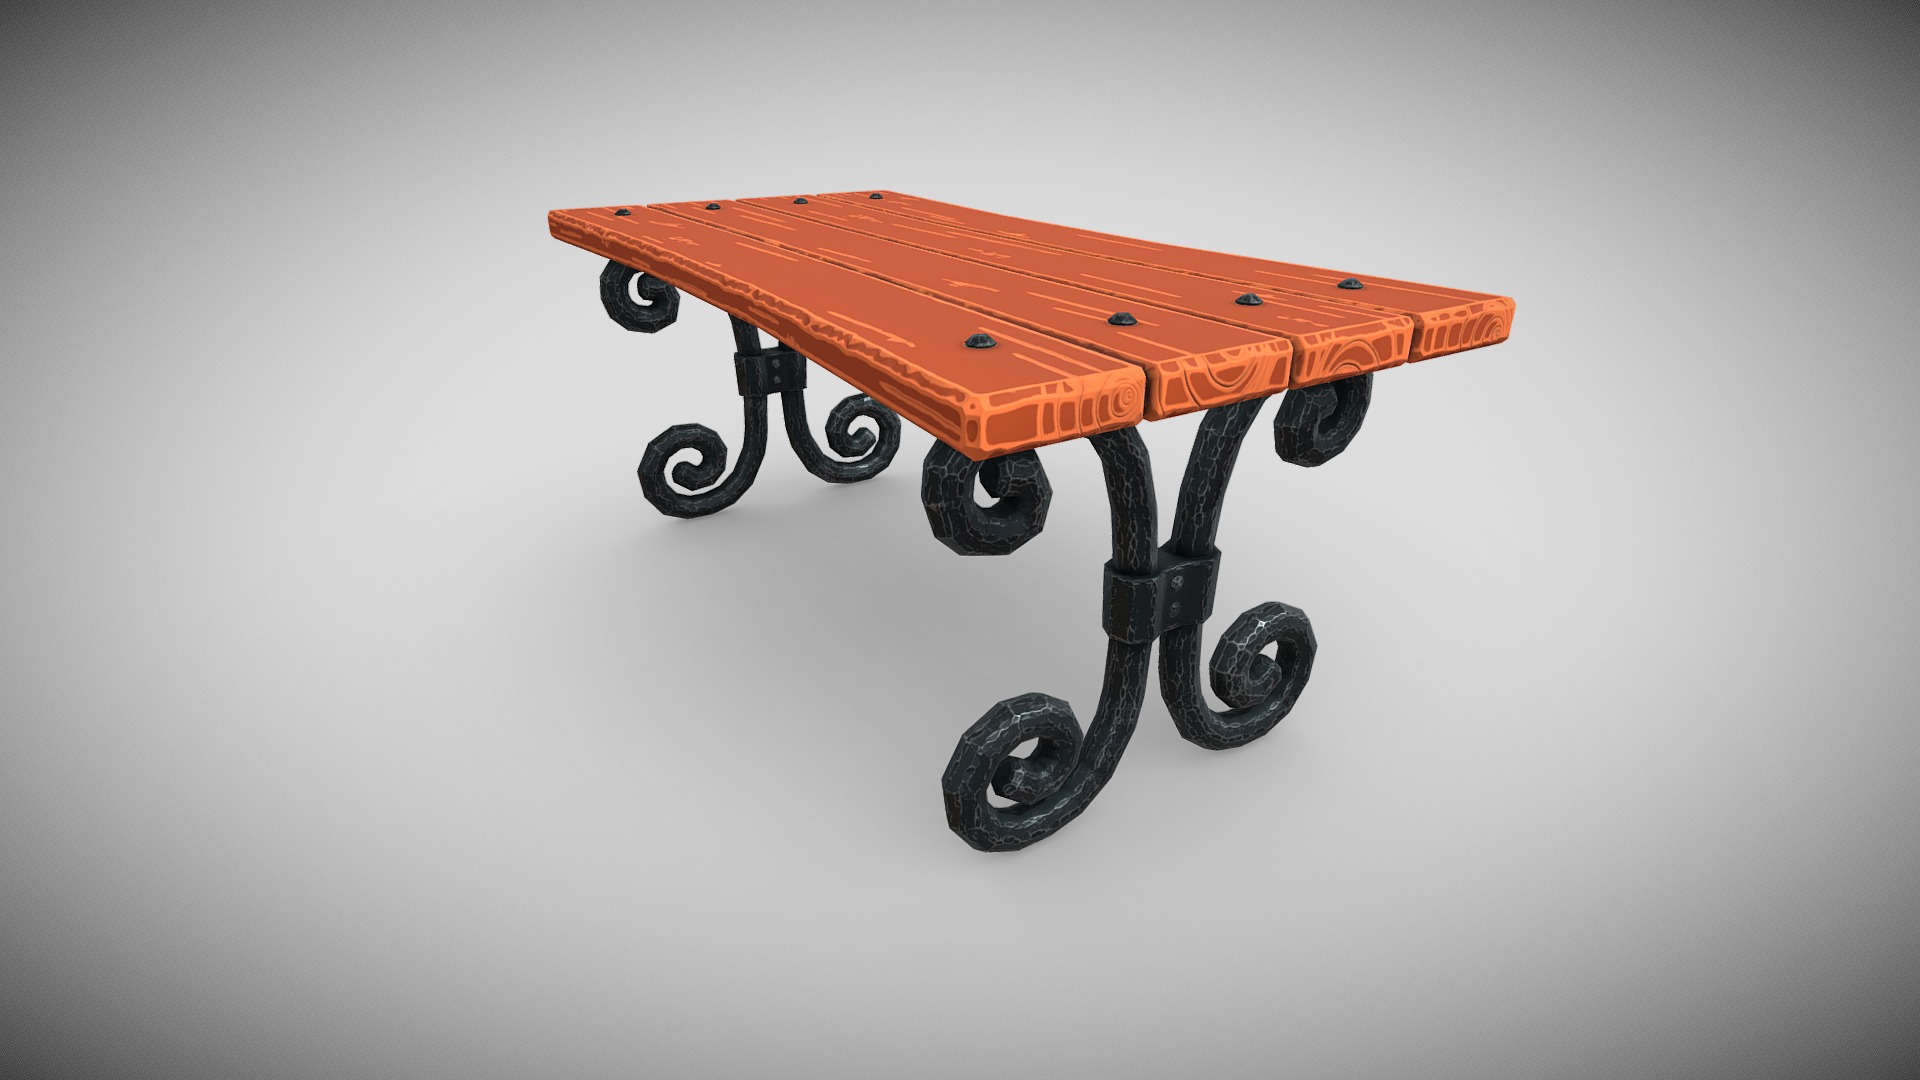 3D model Stylized Wooden/Steel Table - This is a 3D model of the Stylized Wooden/Steel Table. The 3D model is about a small orange skateboard.